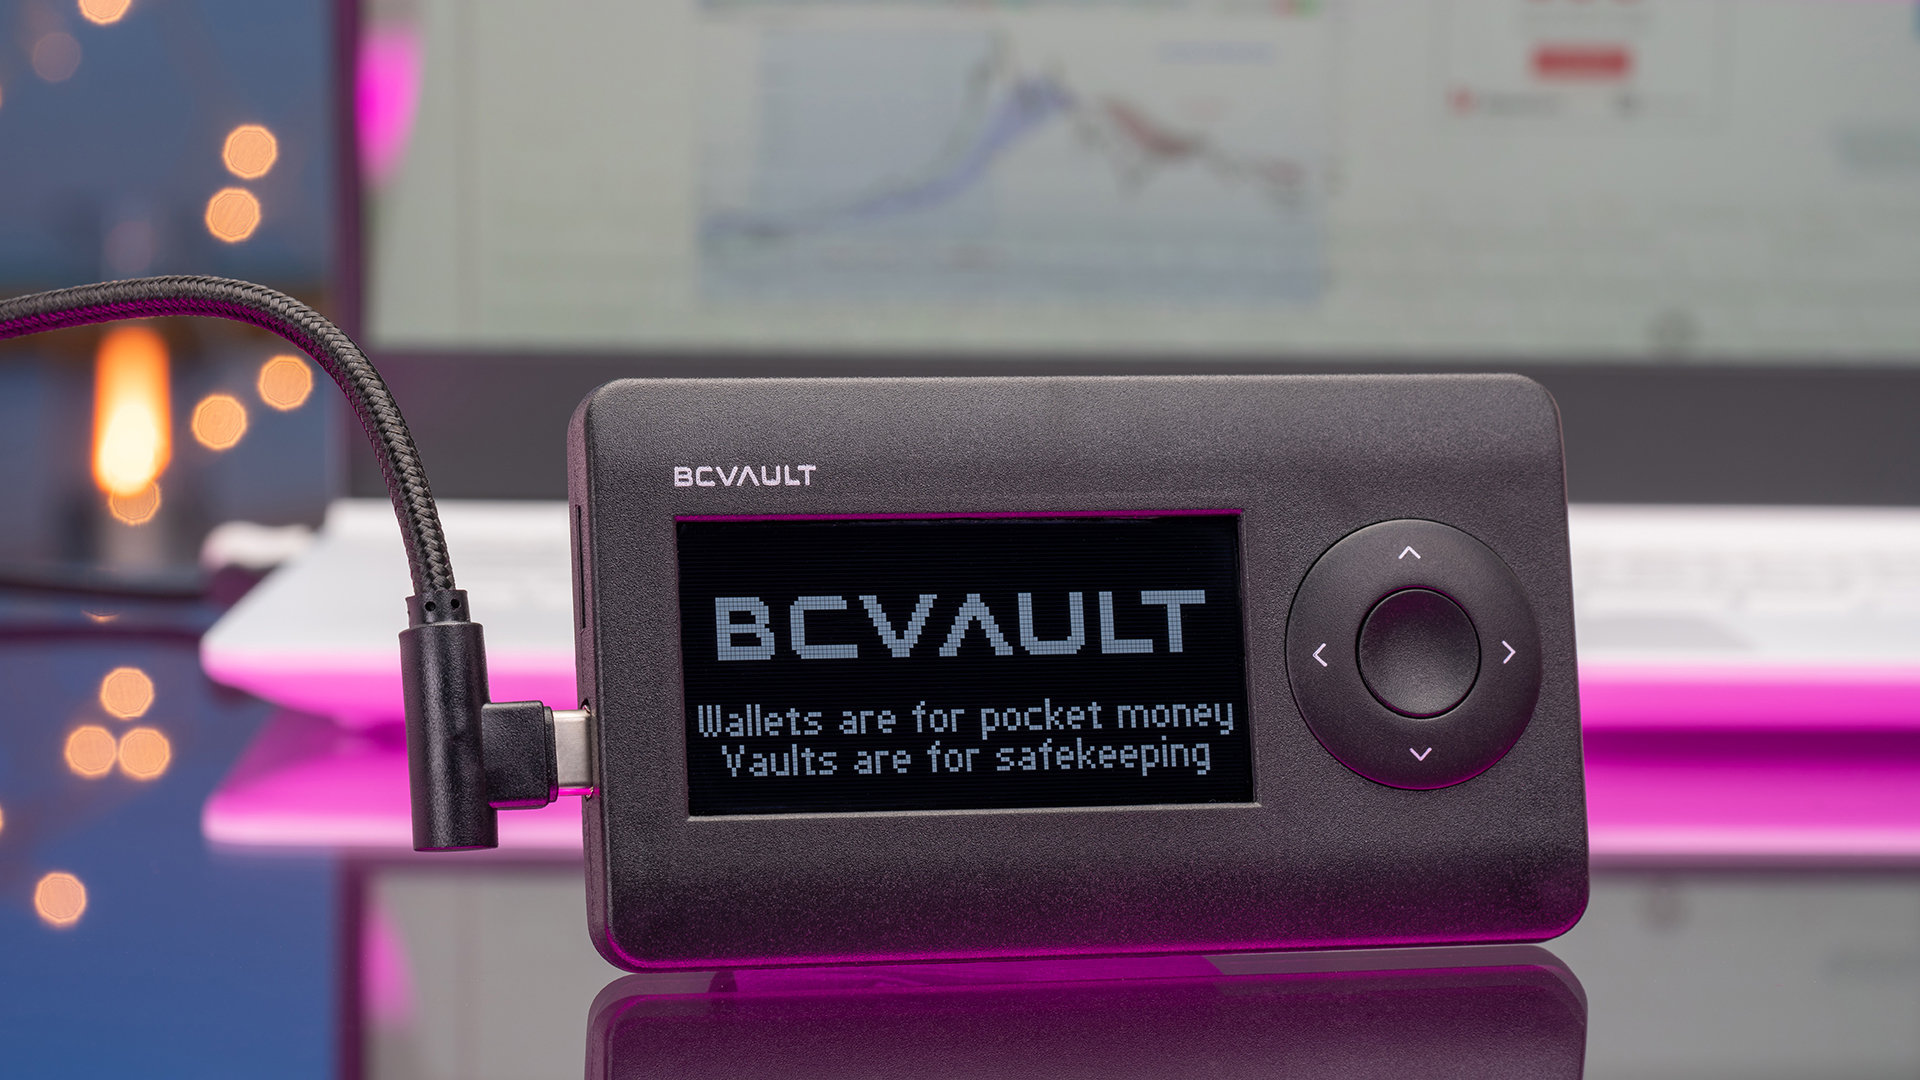 The BC Vault One cryptocurrency wallet offers a range of innovations, like ferroelectric RAM storage and non-deterministic wallets.